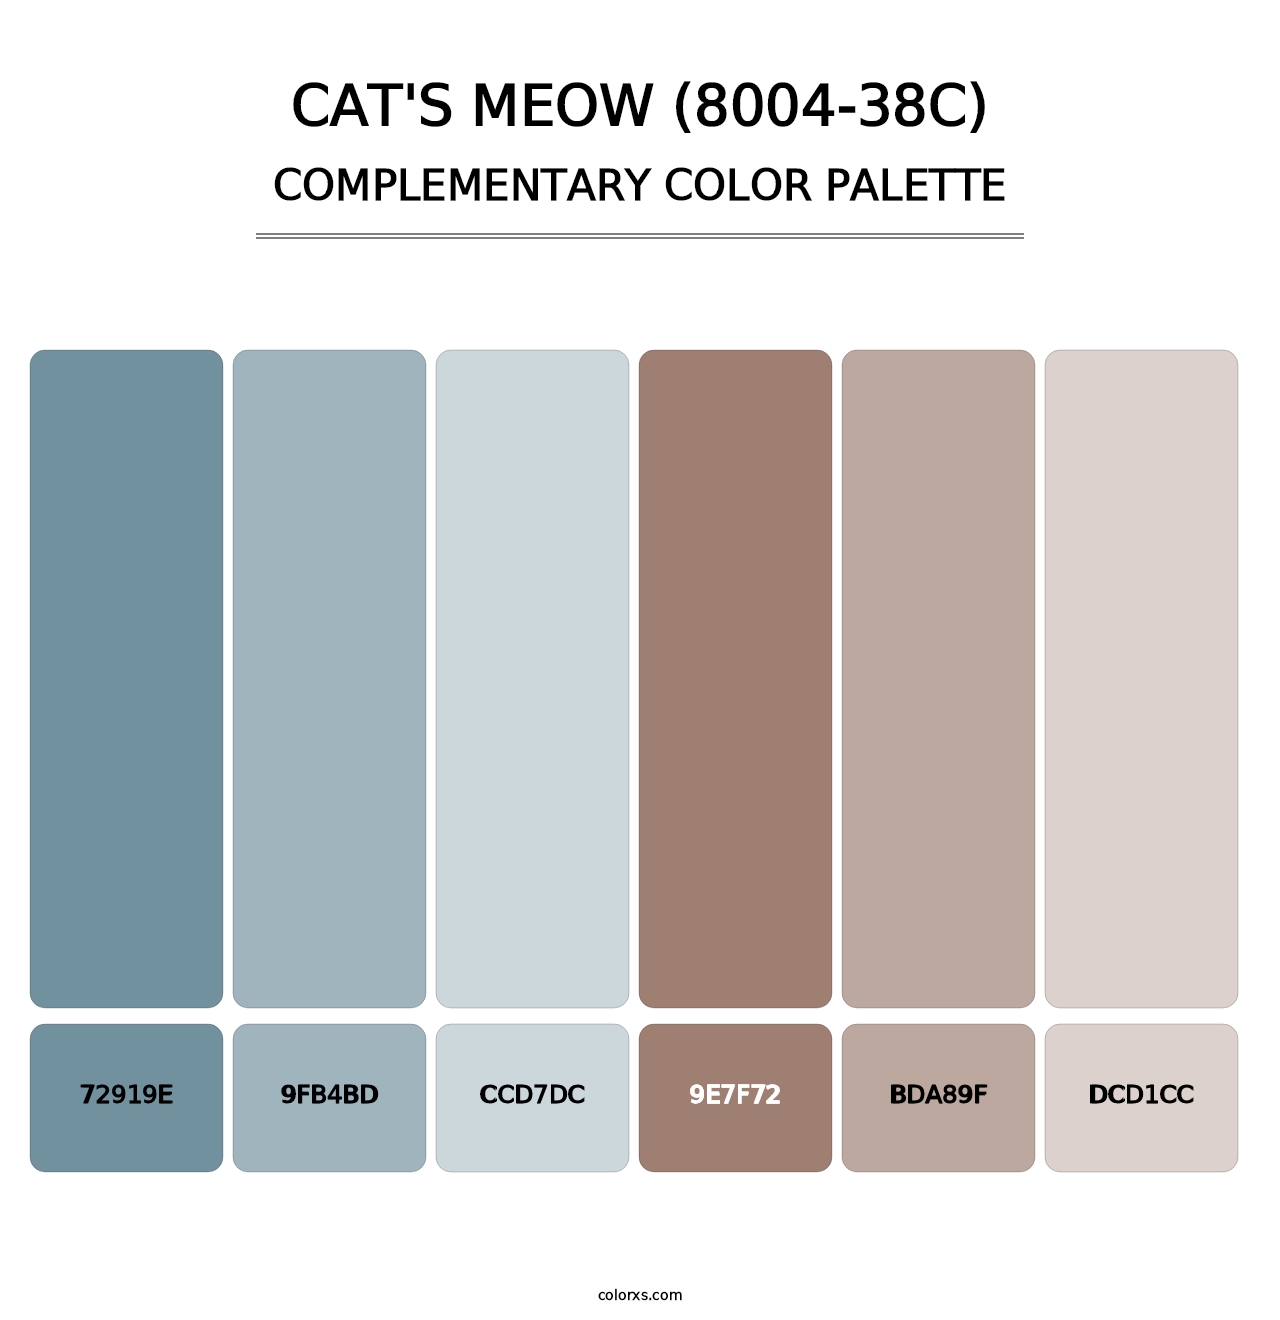 Cat's Meow (8004-38C) - Complementary Color Palette